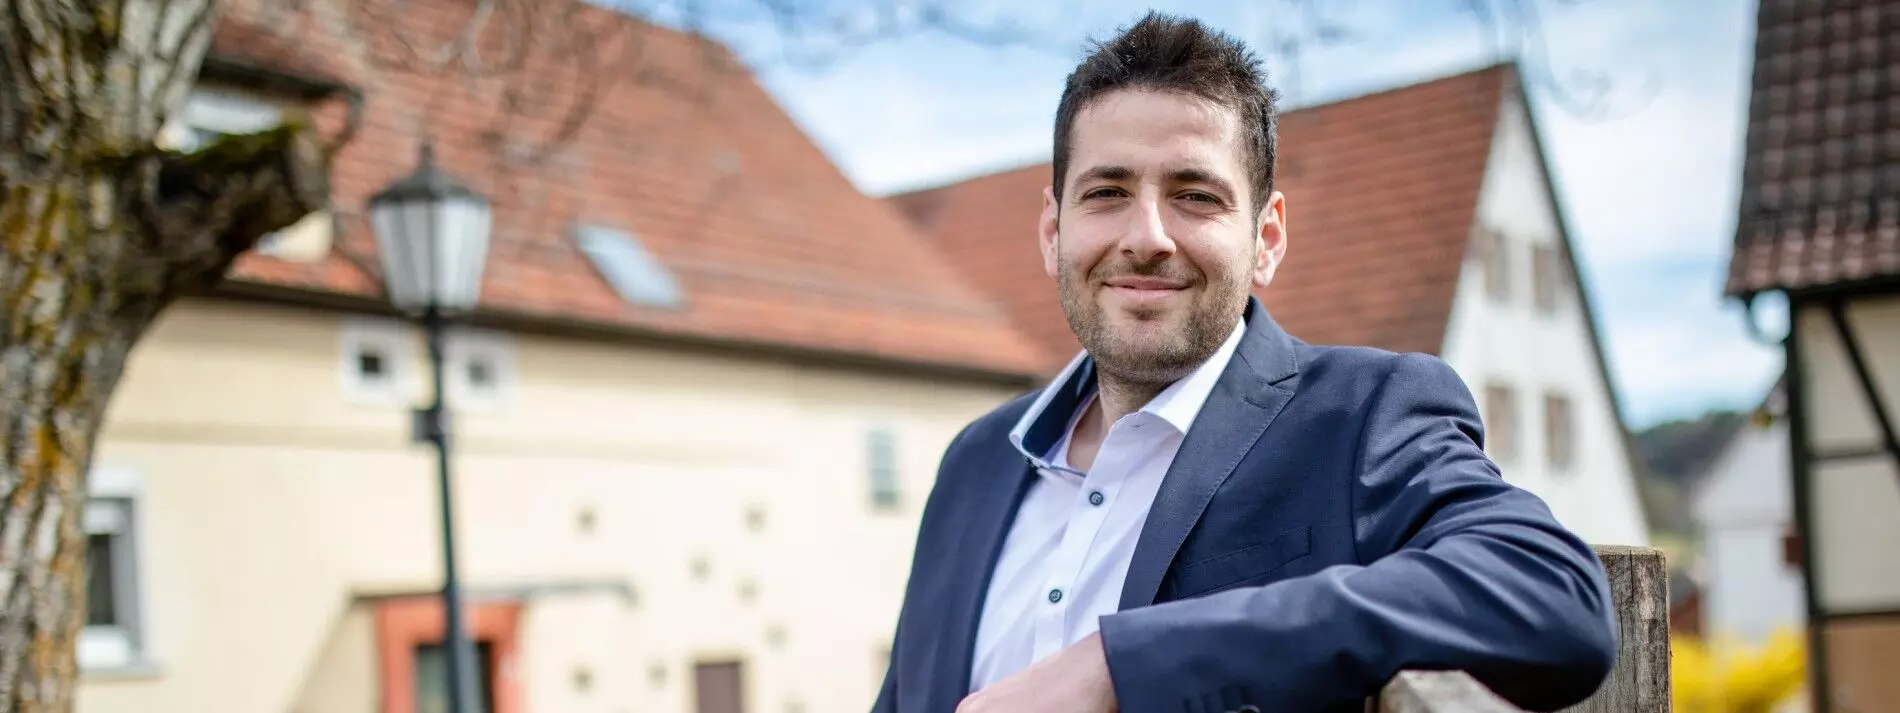 German community elects 29-year-old Syrian refugee as Mayor